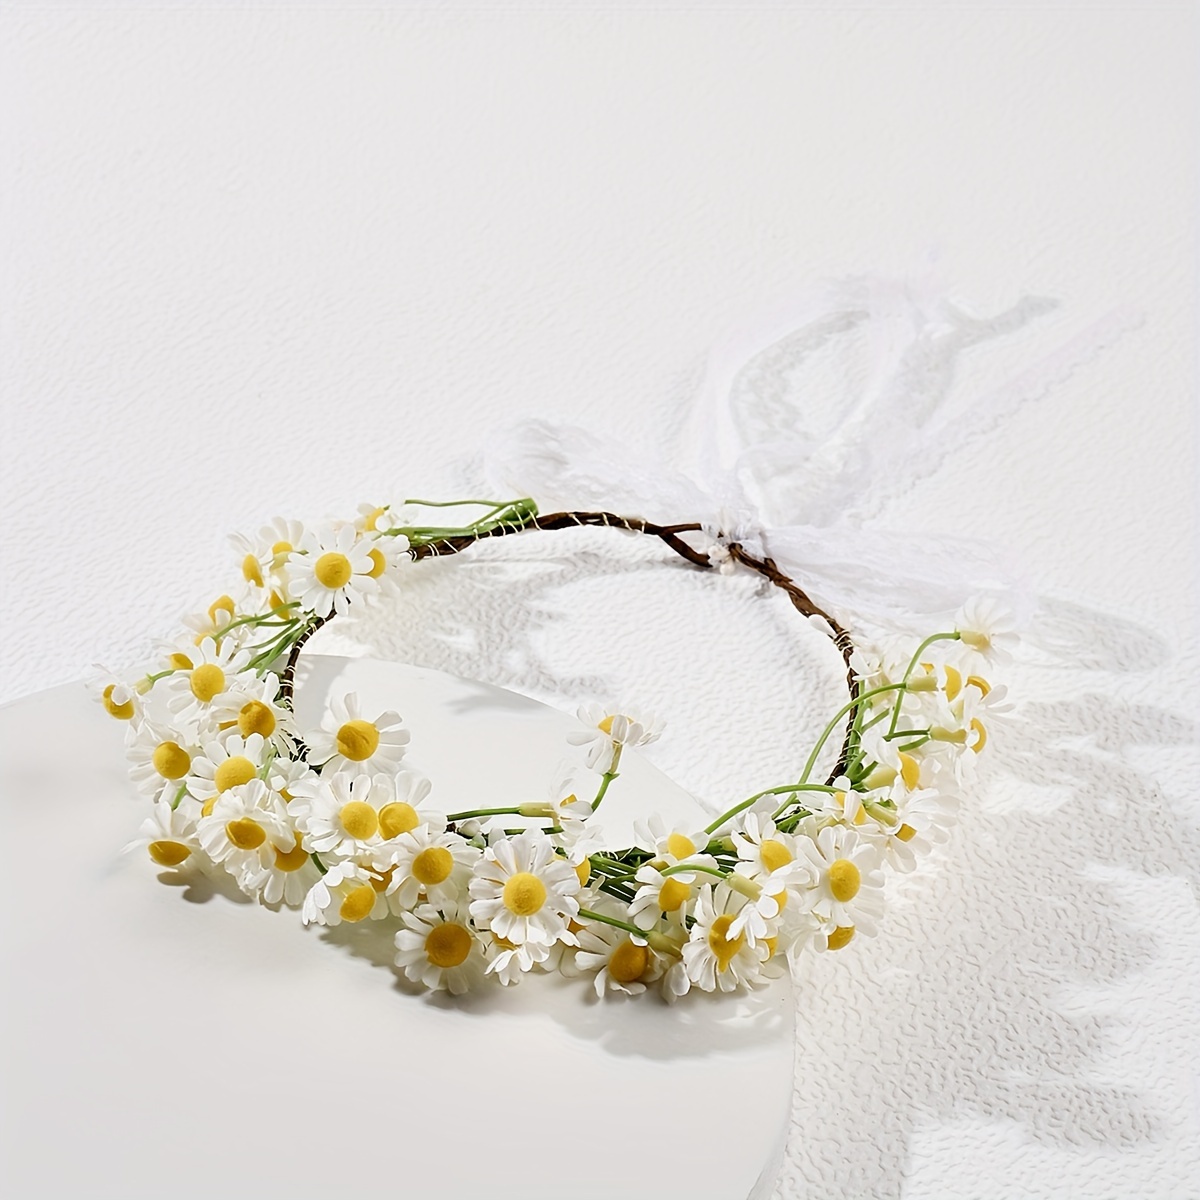 

Chic Daisy Bridal Wreath Headpiece - Polyester Floral Crown For Weddings, Photoshoots & Graduation Parties Wedding Dresses For Bride Bride Accessories